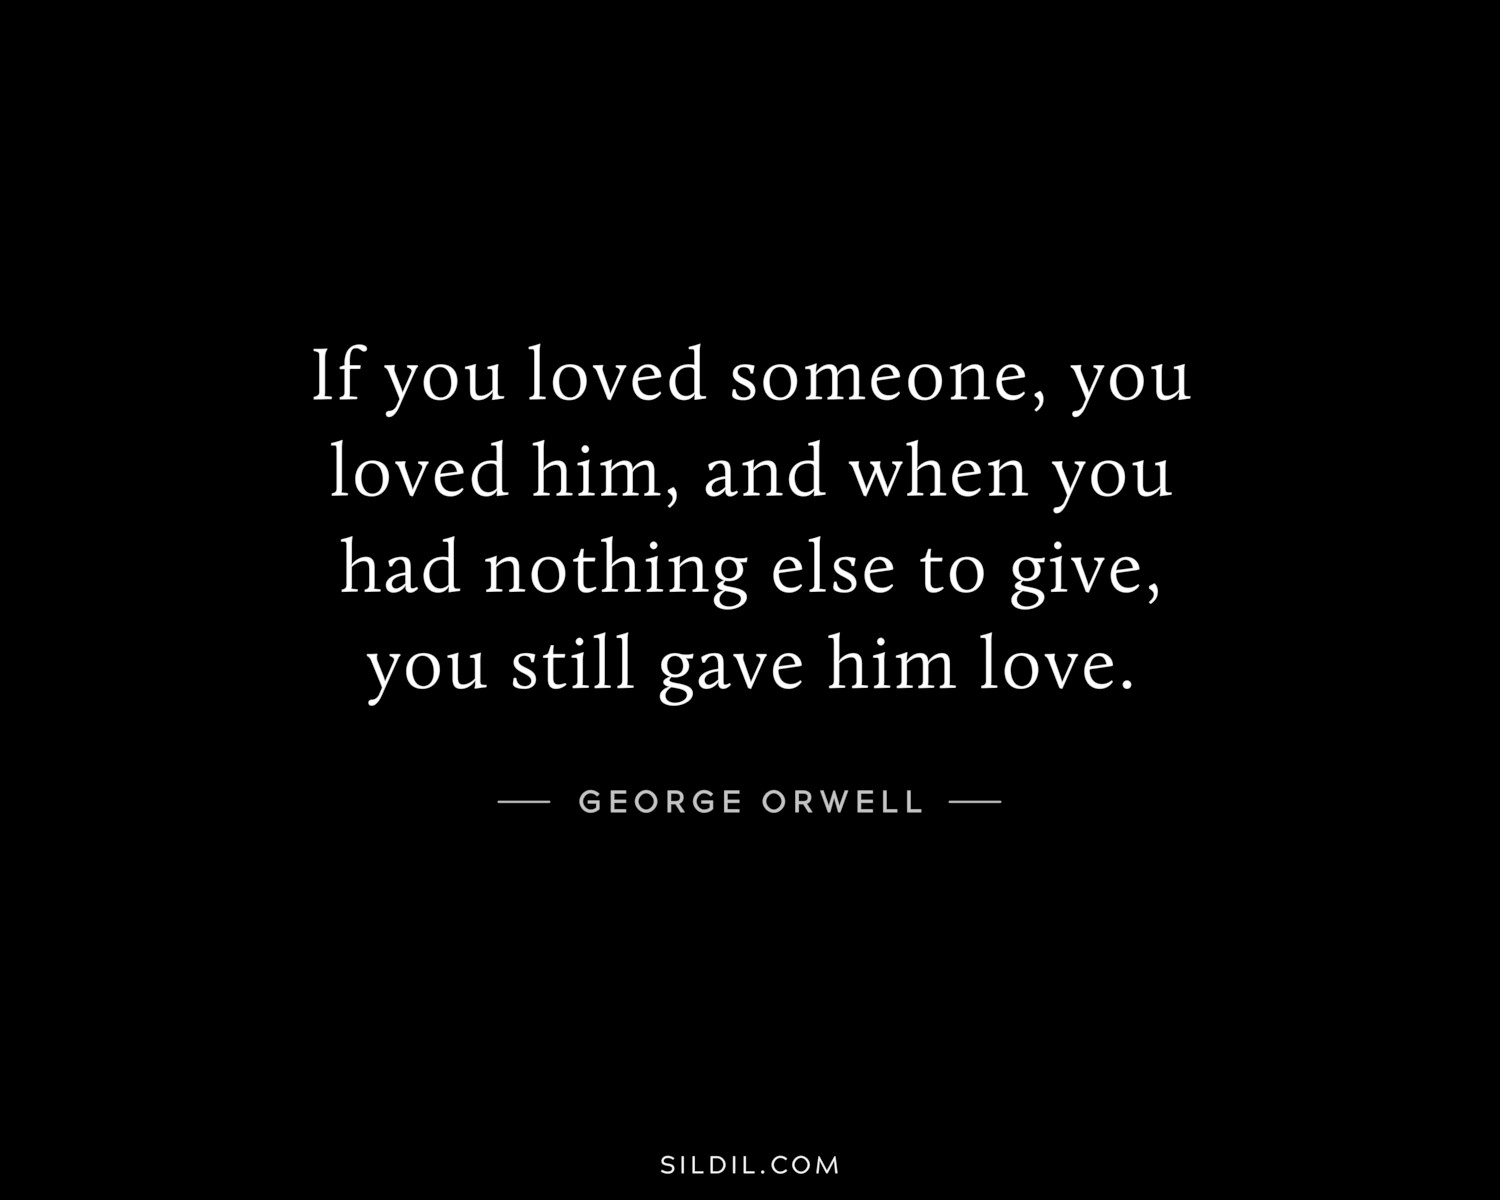 If you loved someone, you loved him, and when you had nothing else to give, you still gave him love.